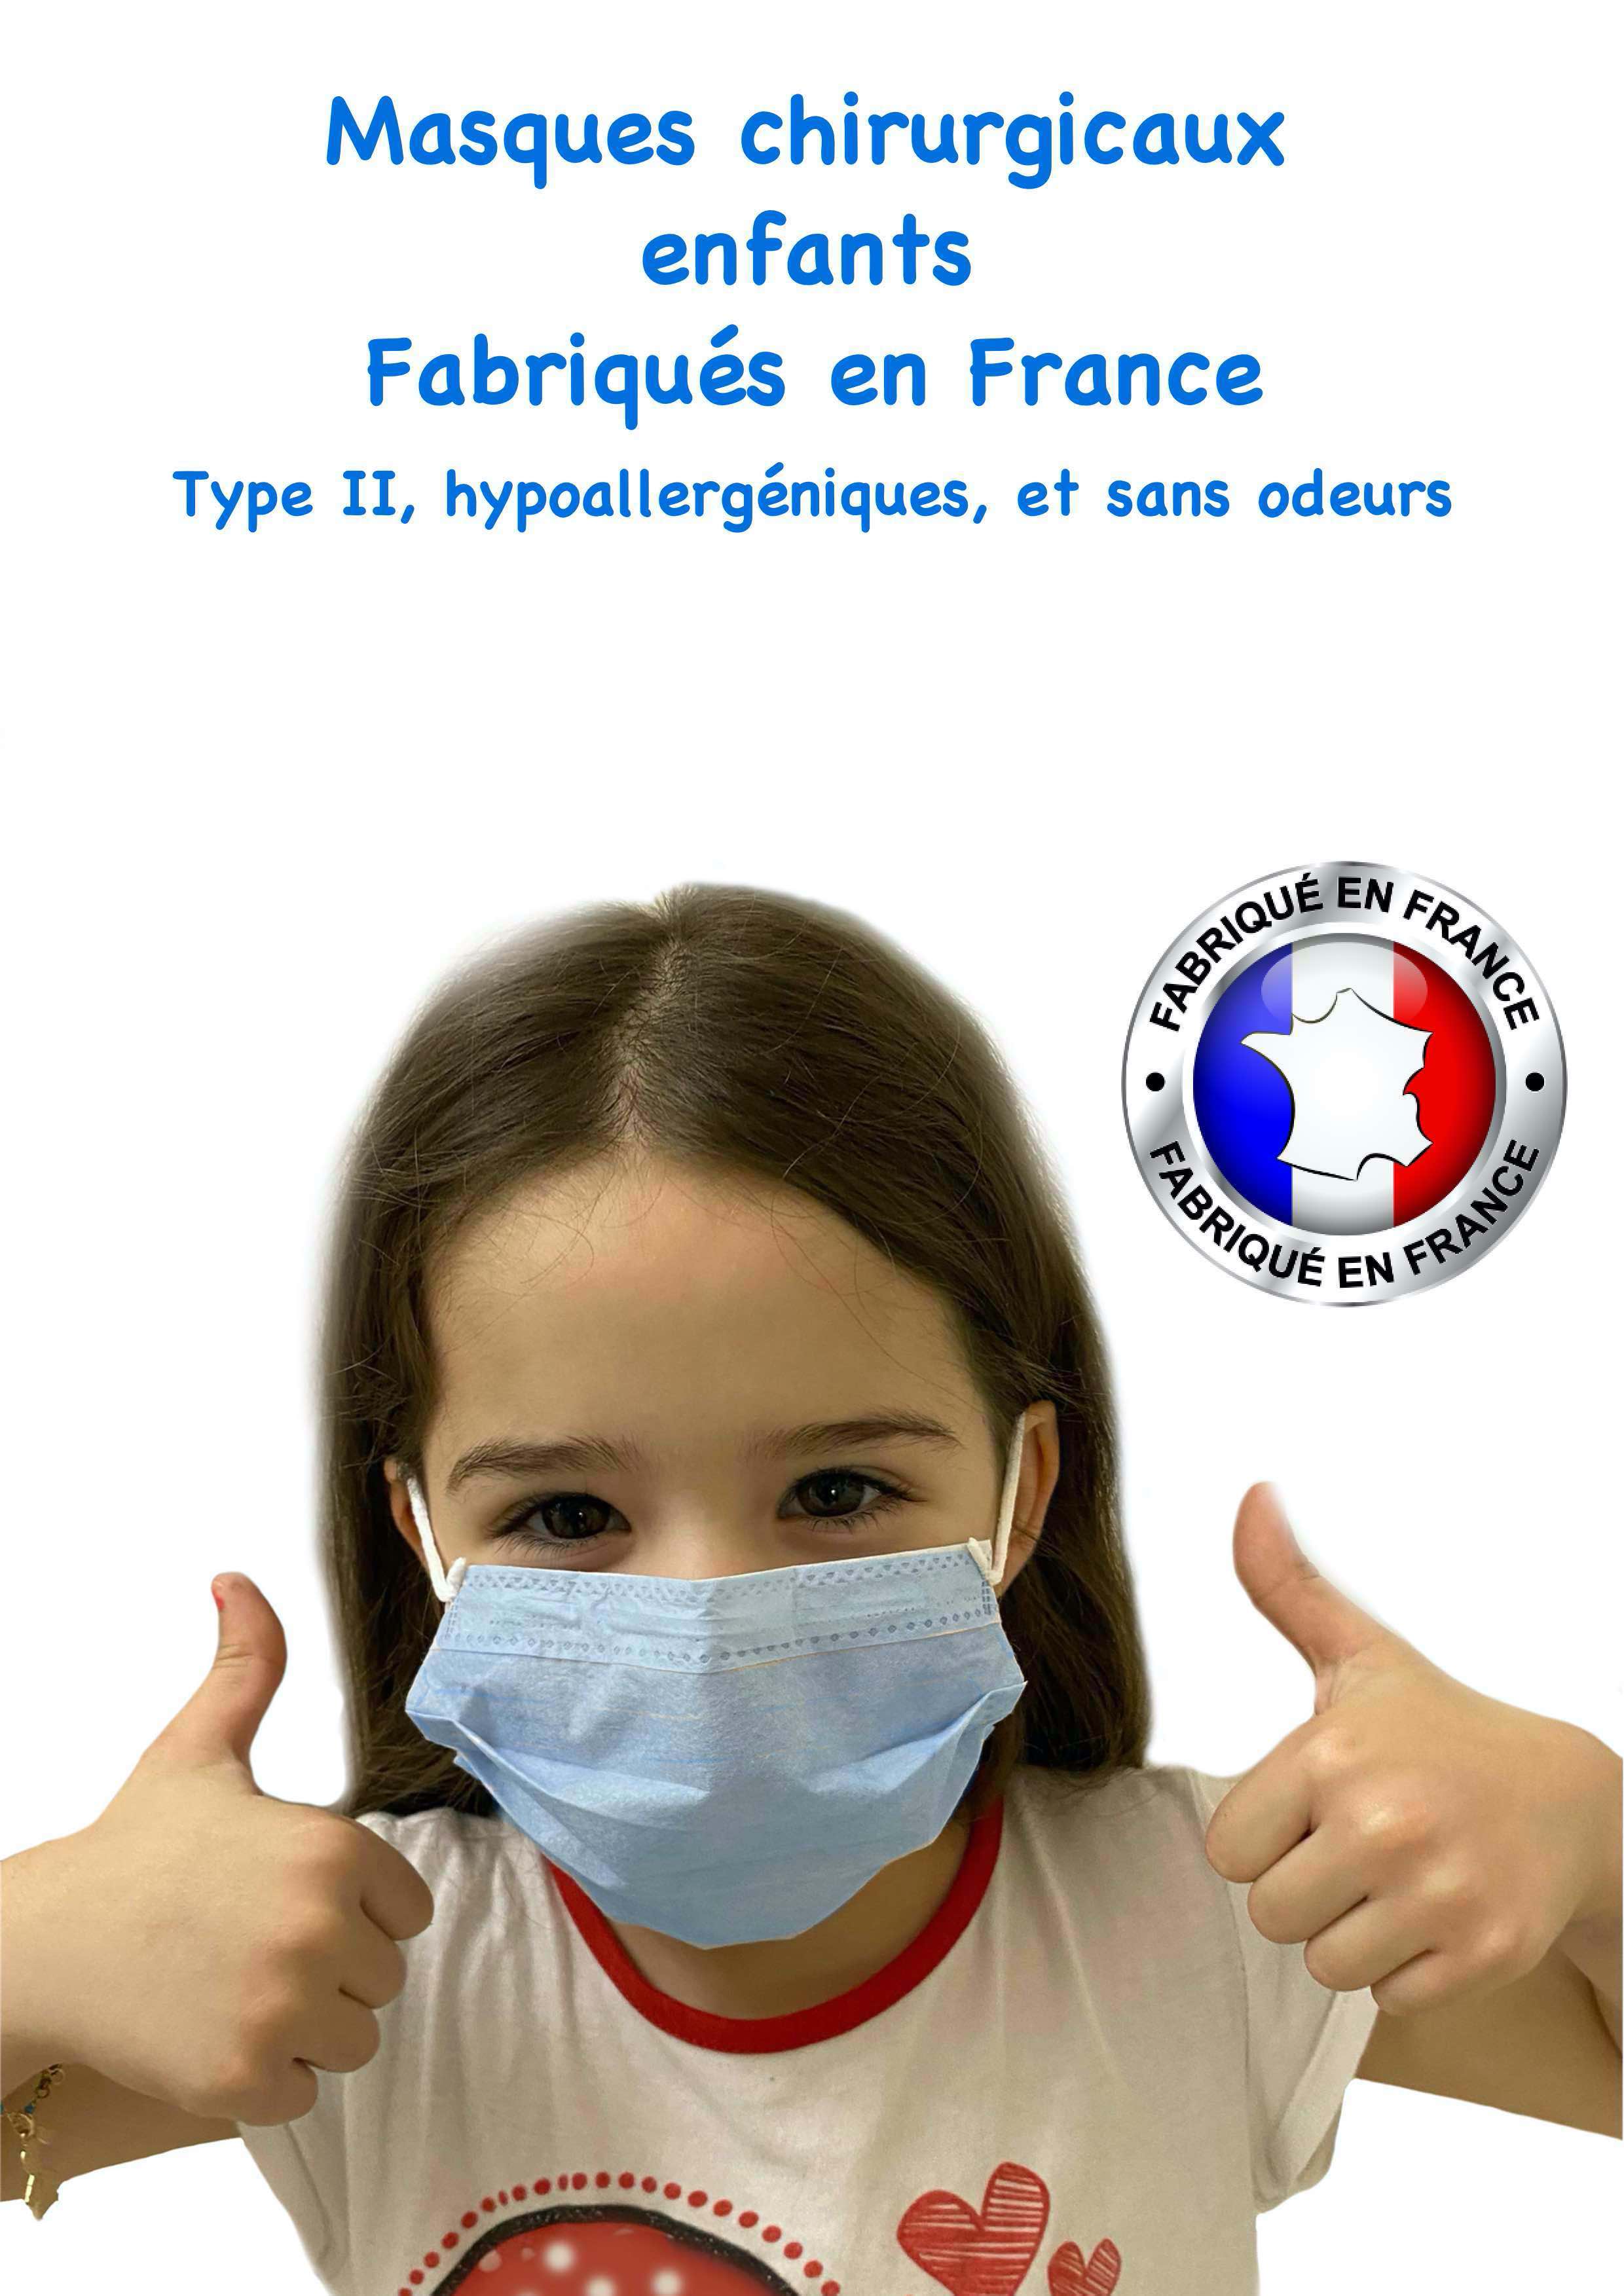 Masque chirurgical enfant type 2R - Made in France